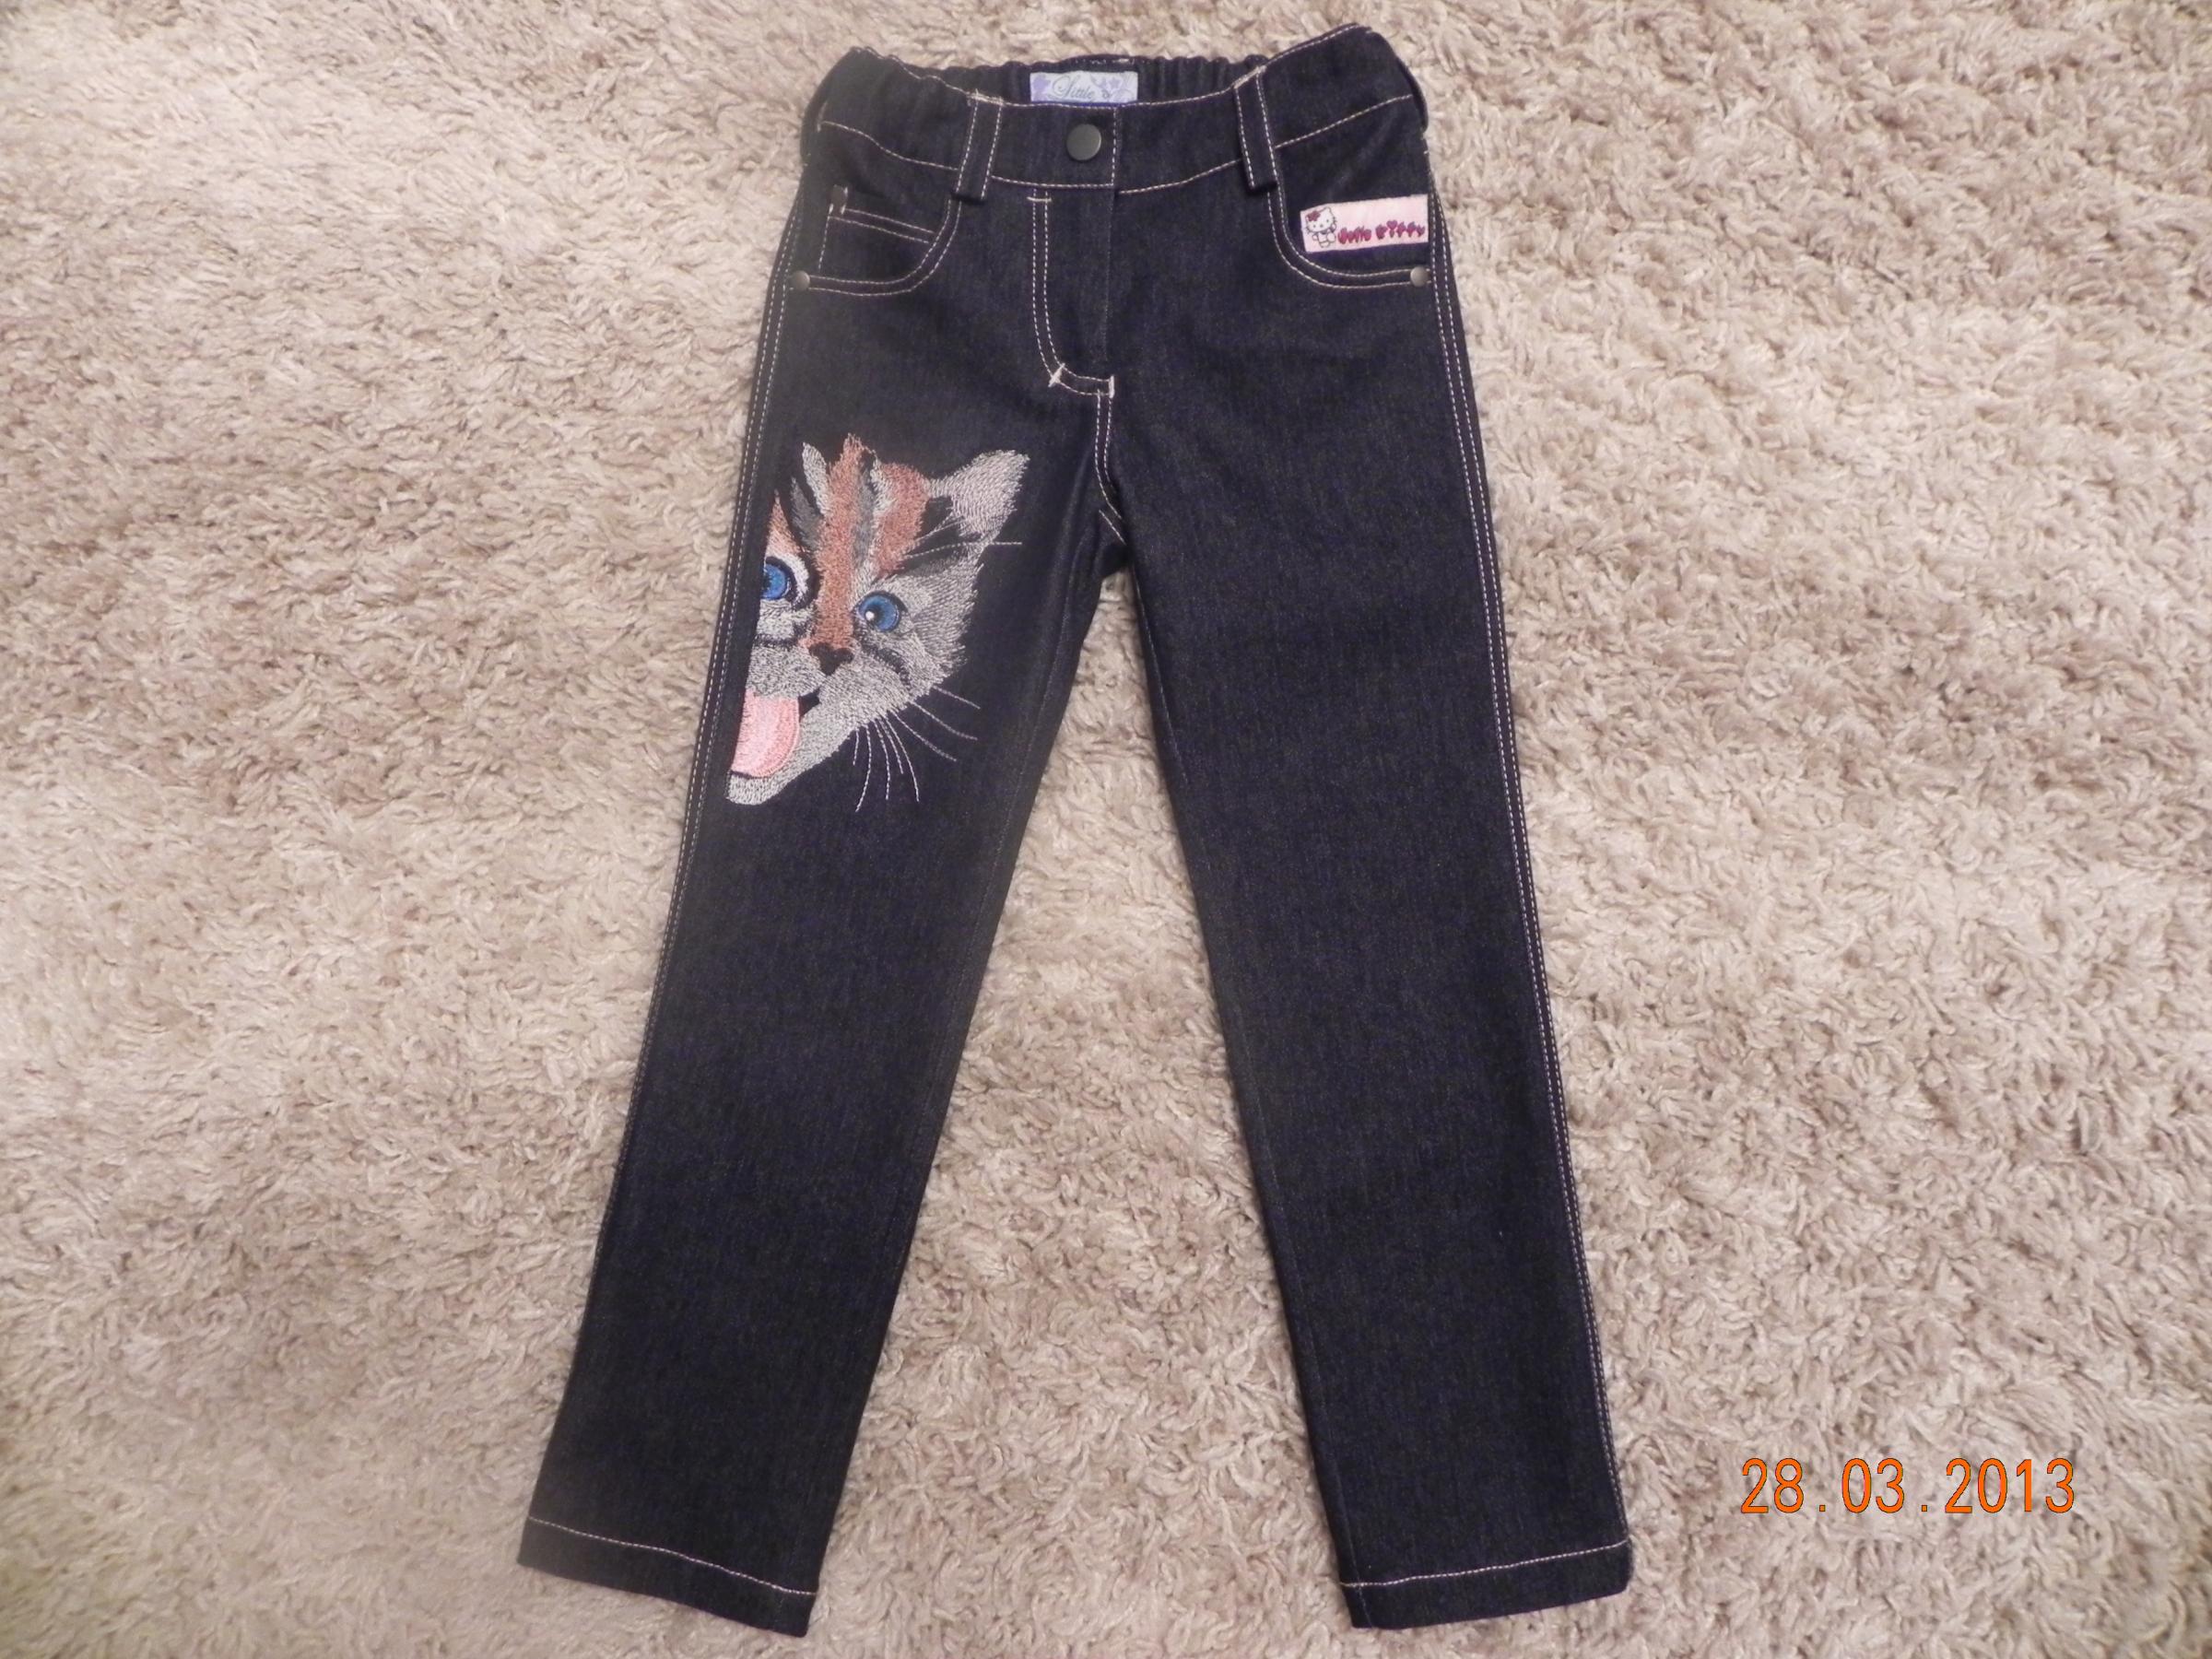 Jeans with cat free embroidery